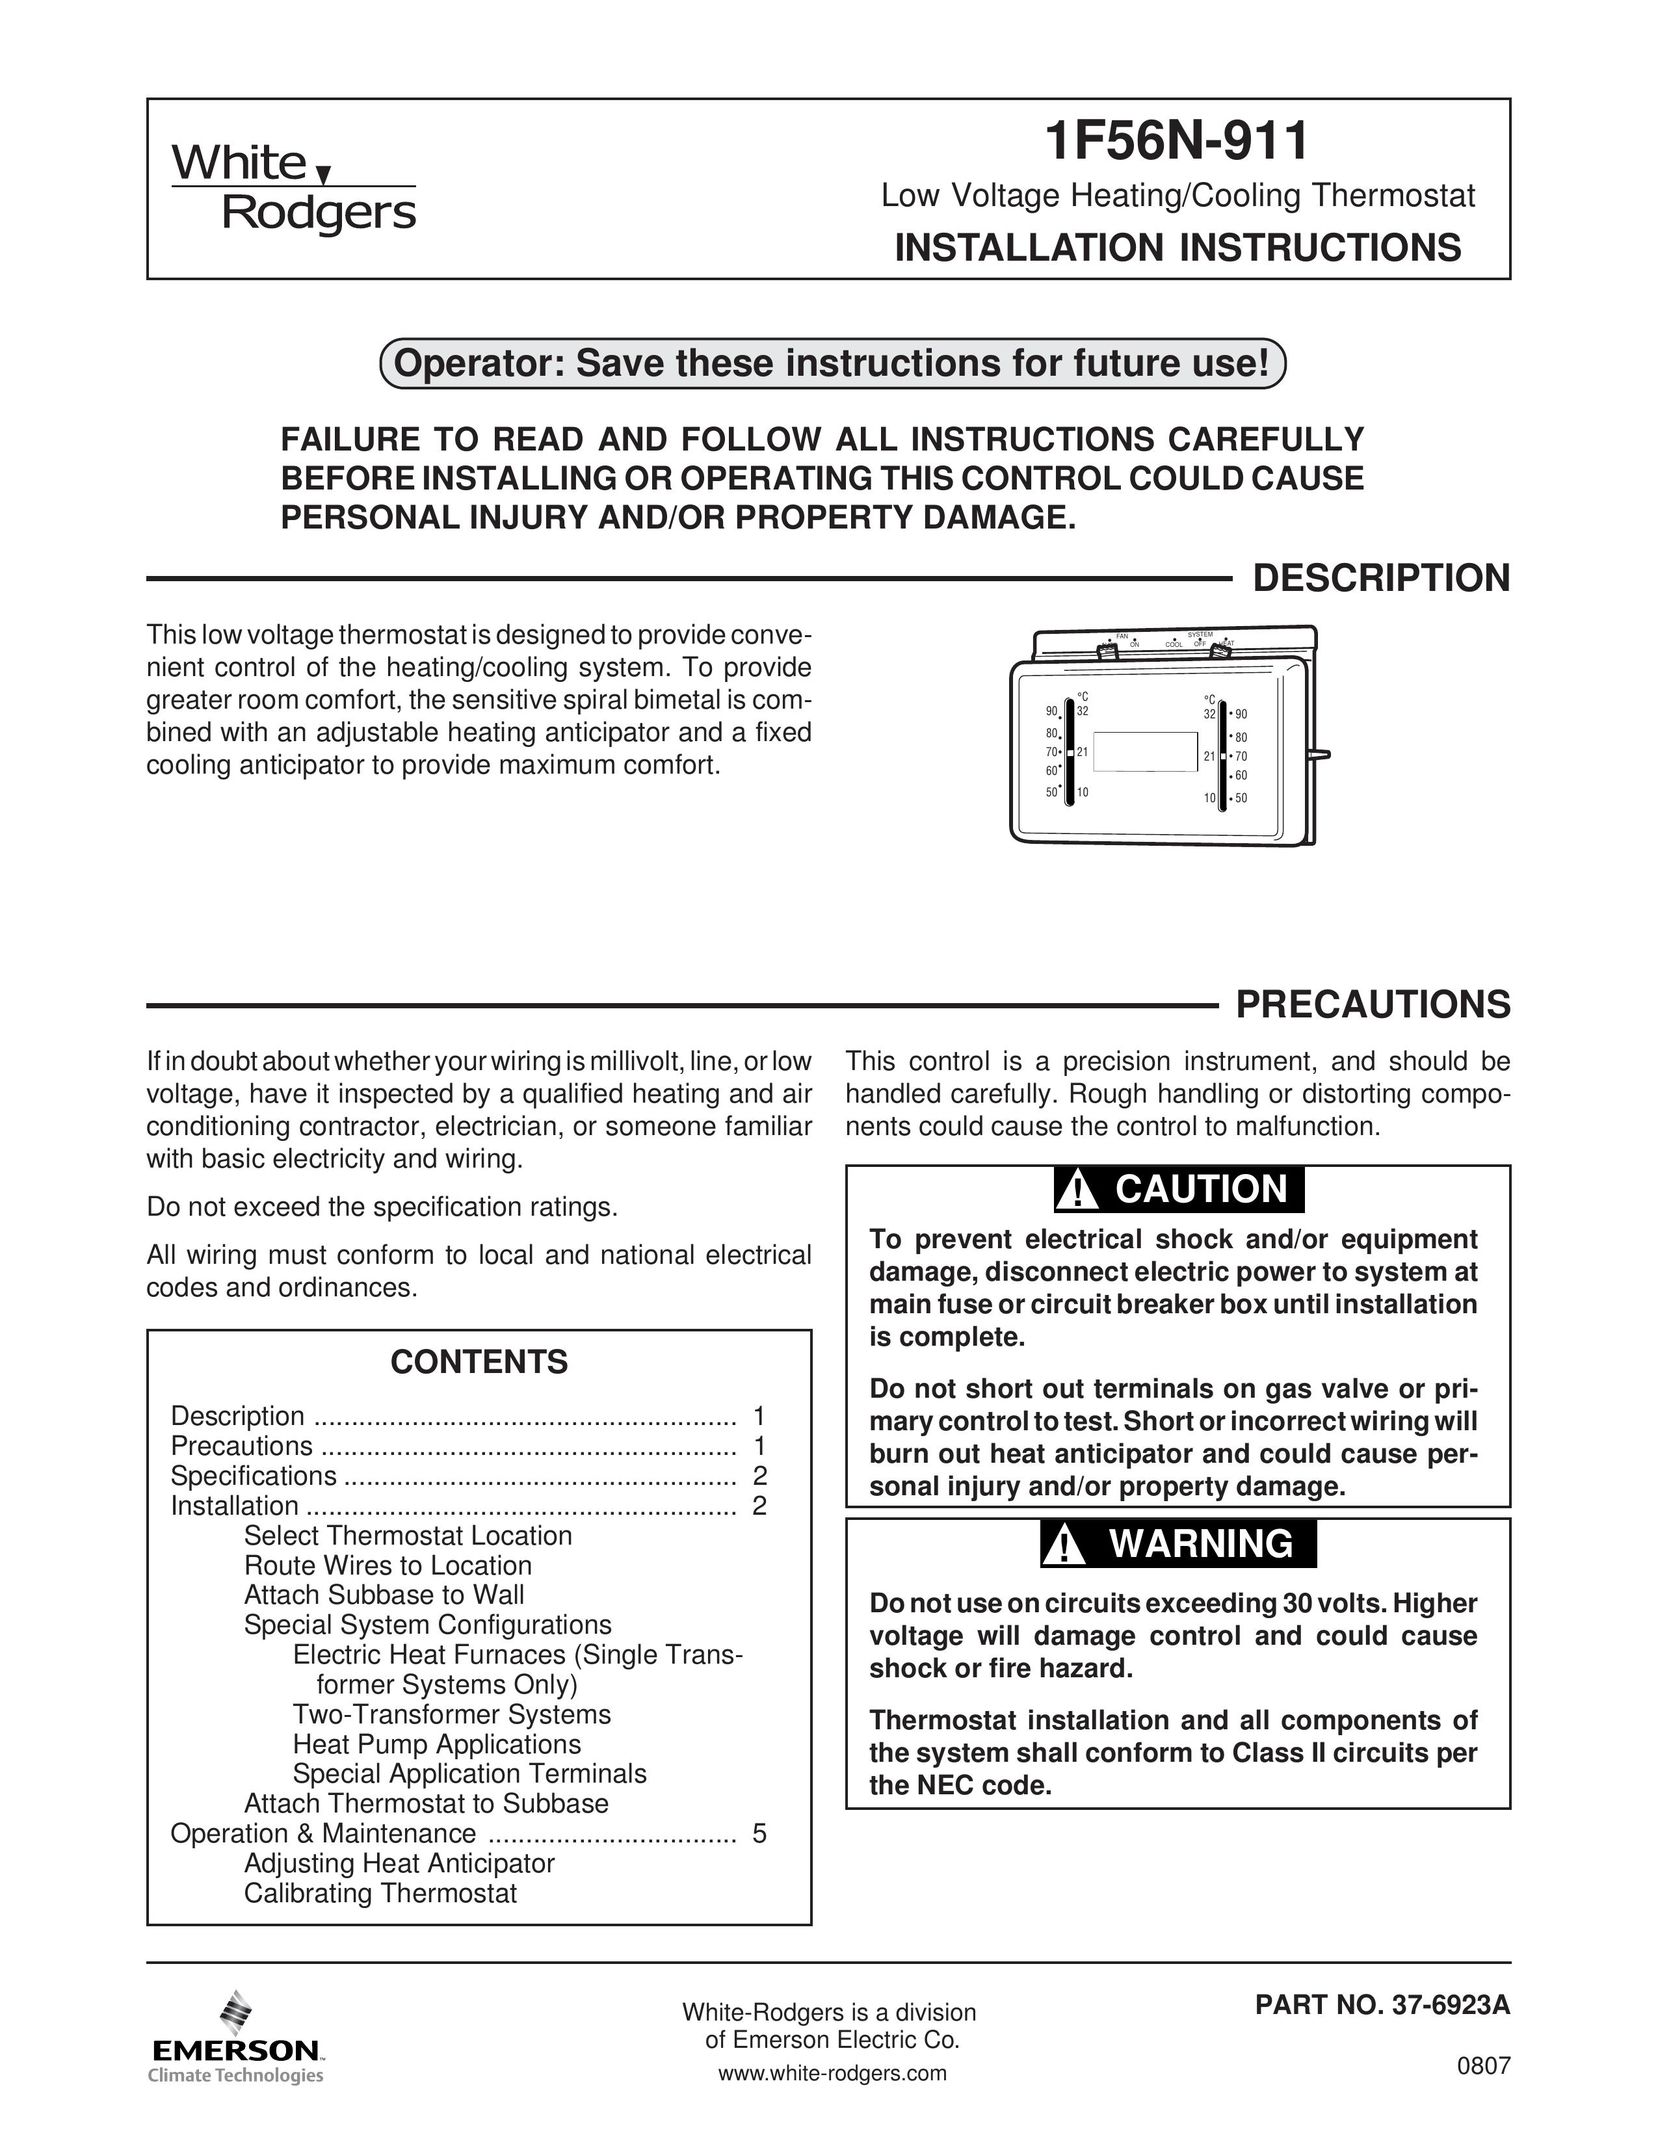 White Rodgers 1F56N-911 Thermostat User Manual